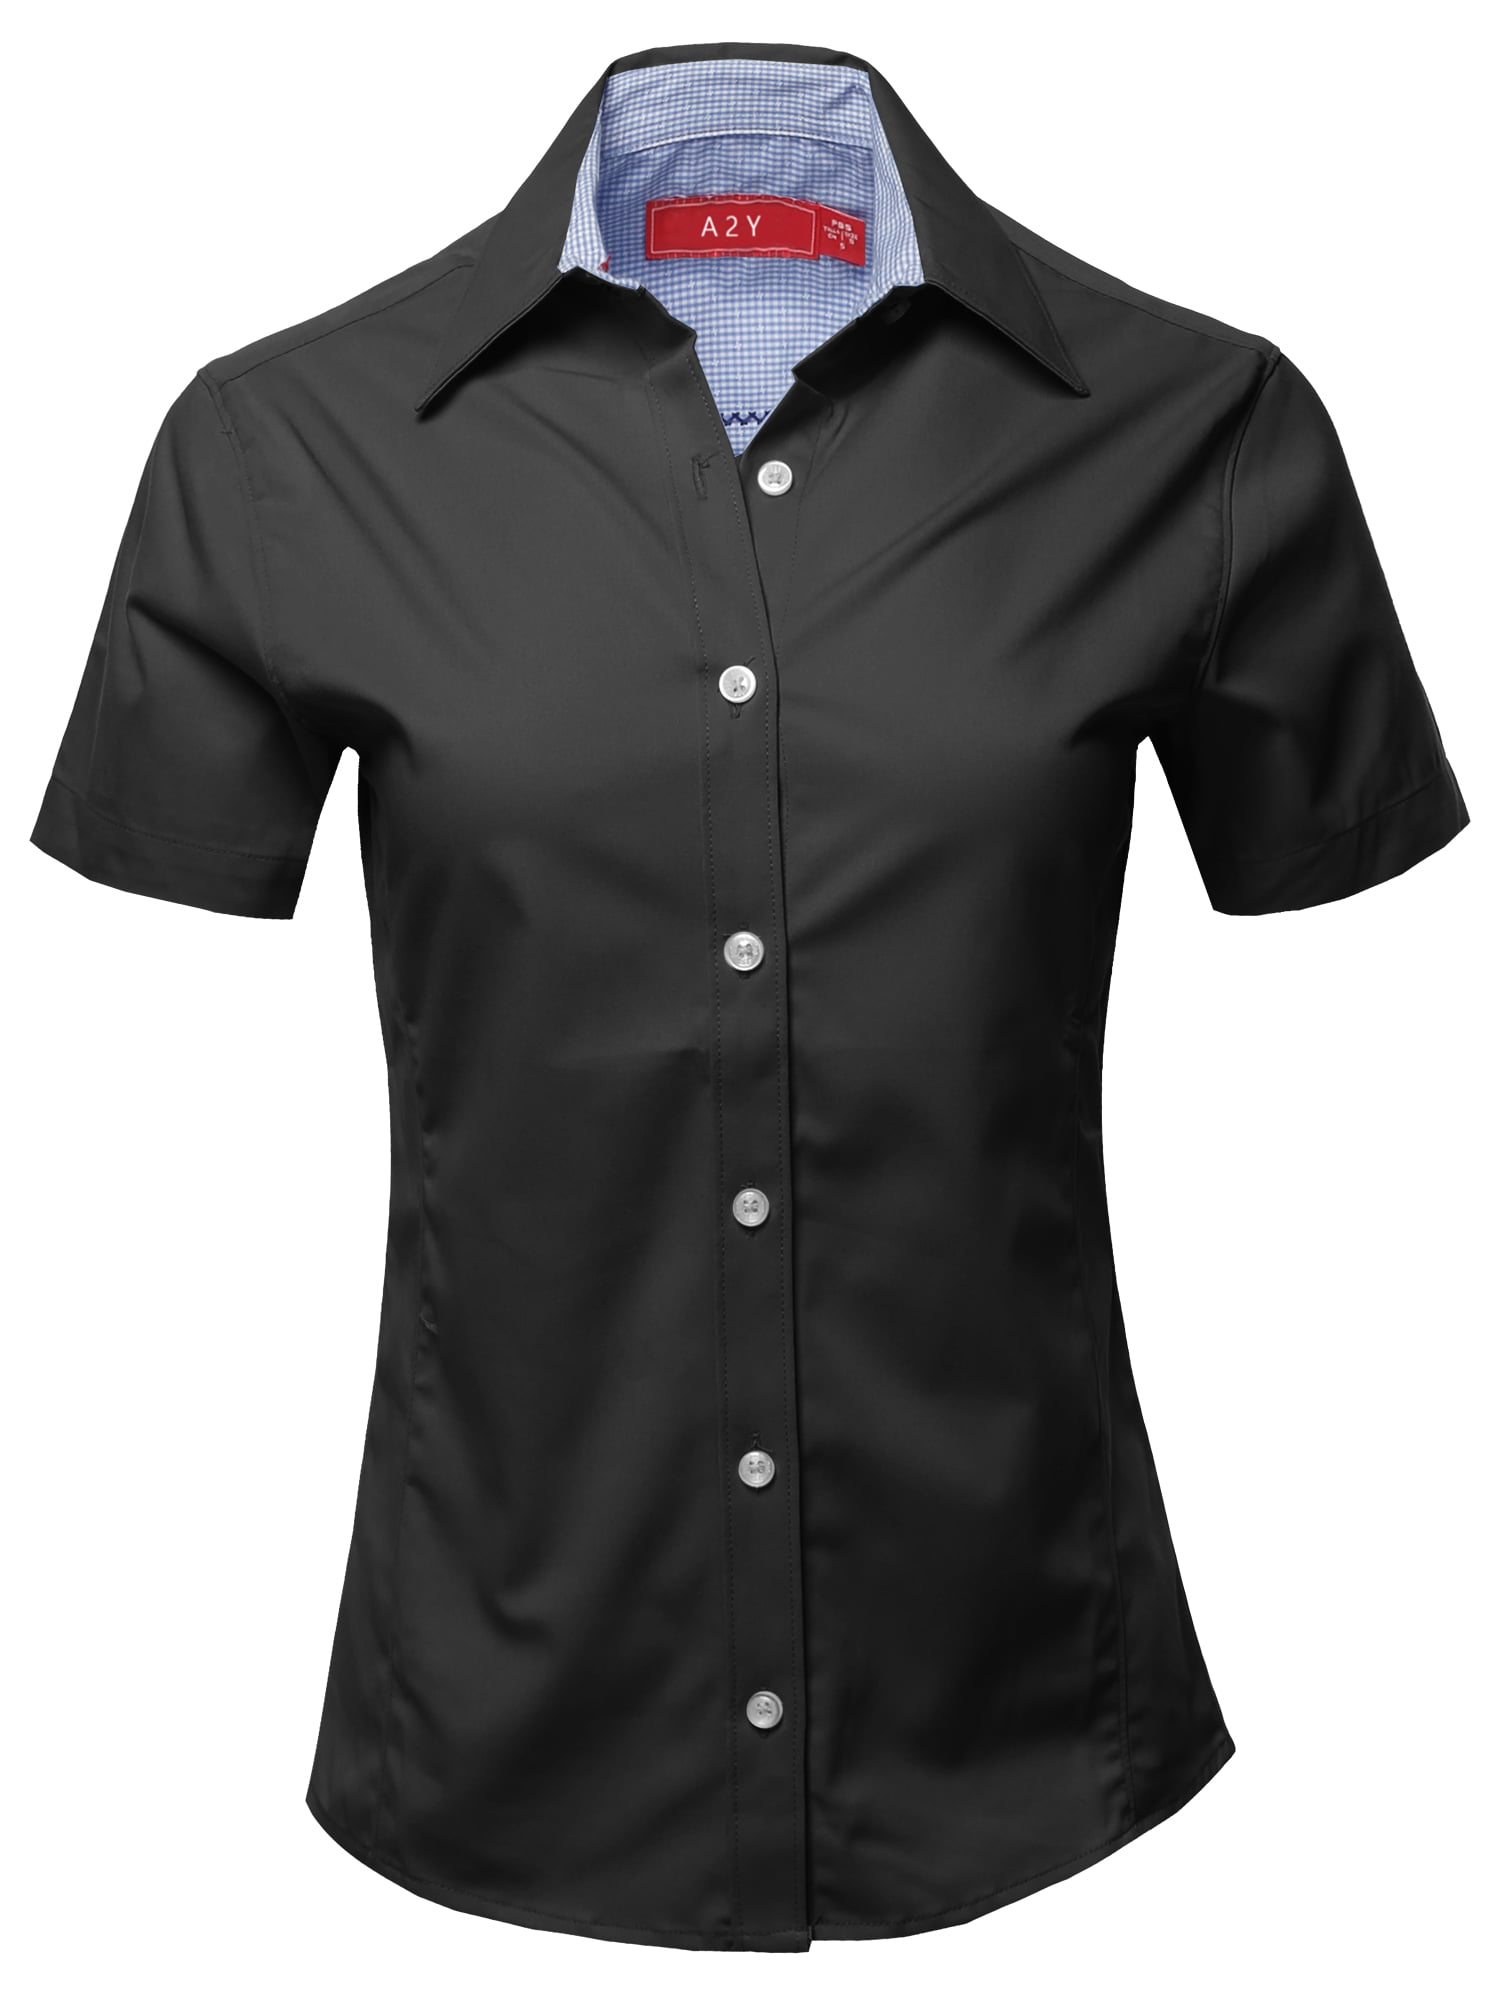 A2Y - A2Y Women's Basic Durable Short Sleeve Button Down Business ...